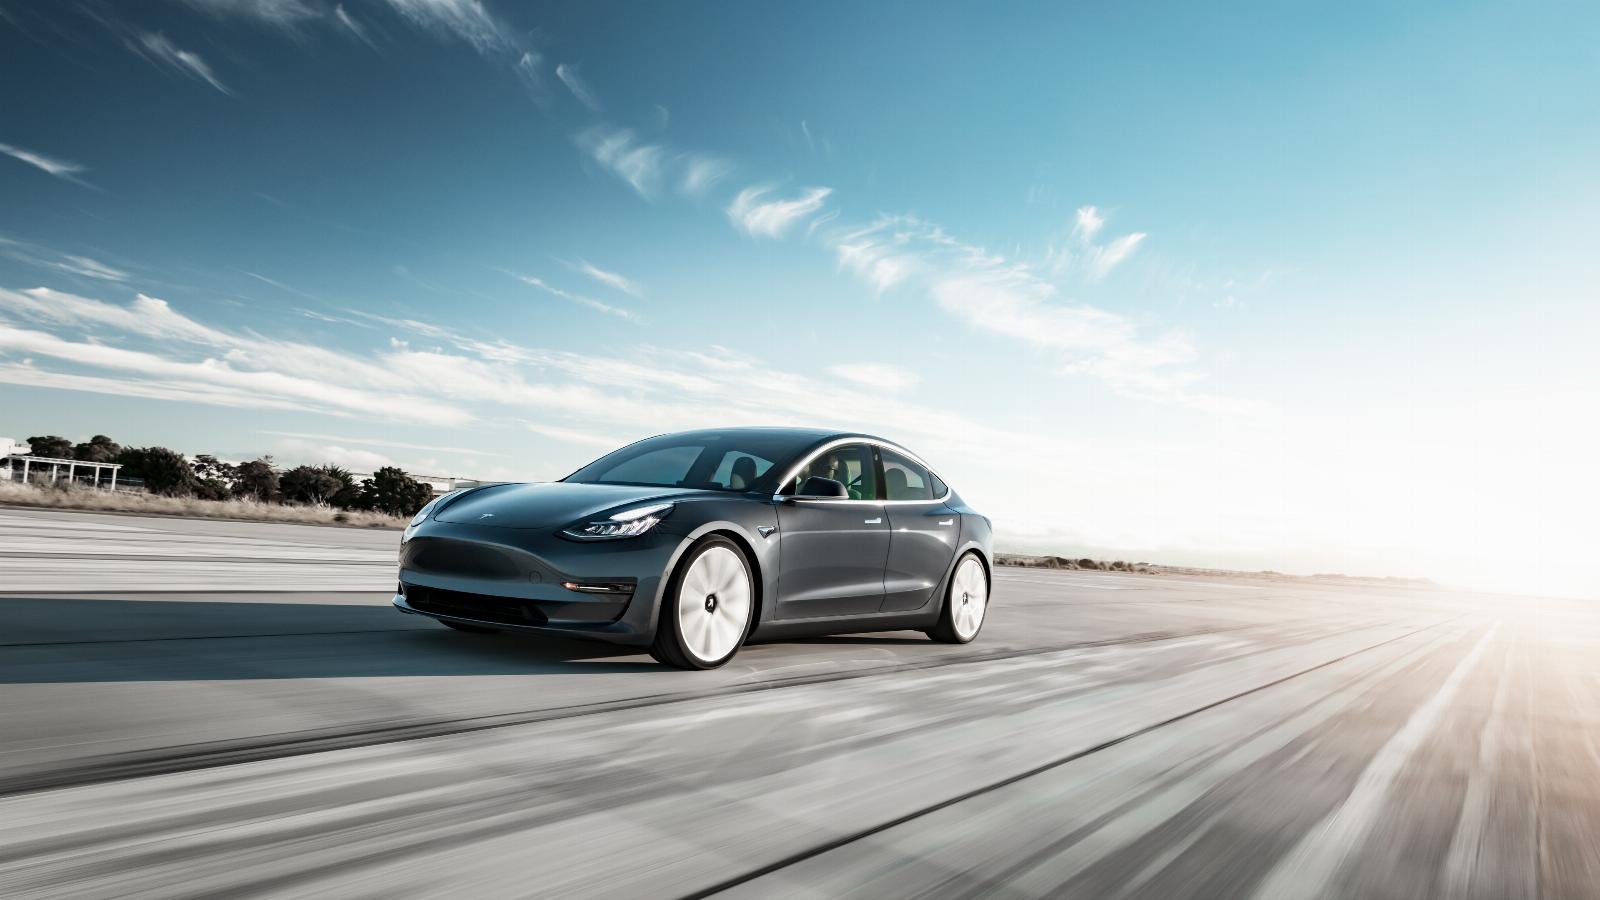 Daily Crunch: 2 Tesla models qualify for EV tax credits after company marks prices down by 20%